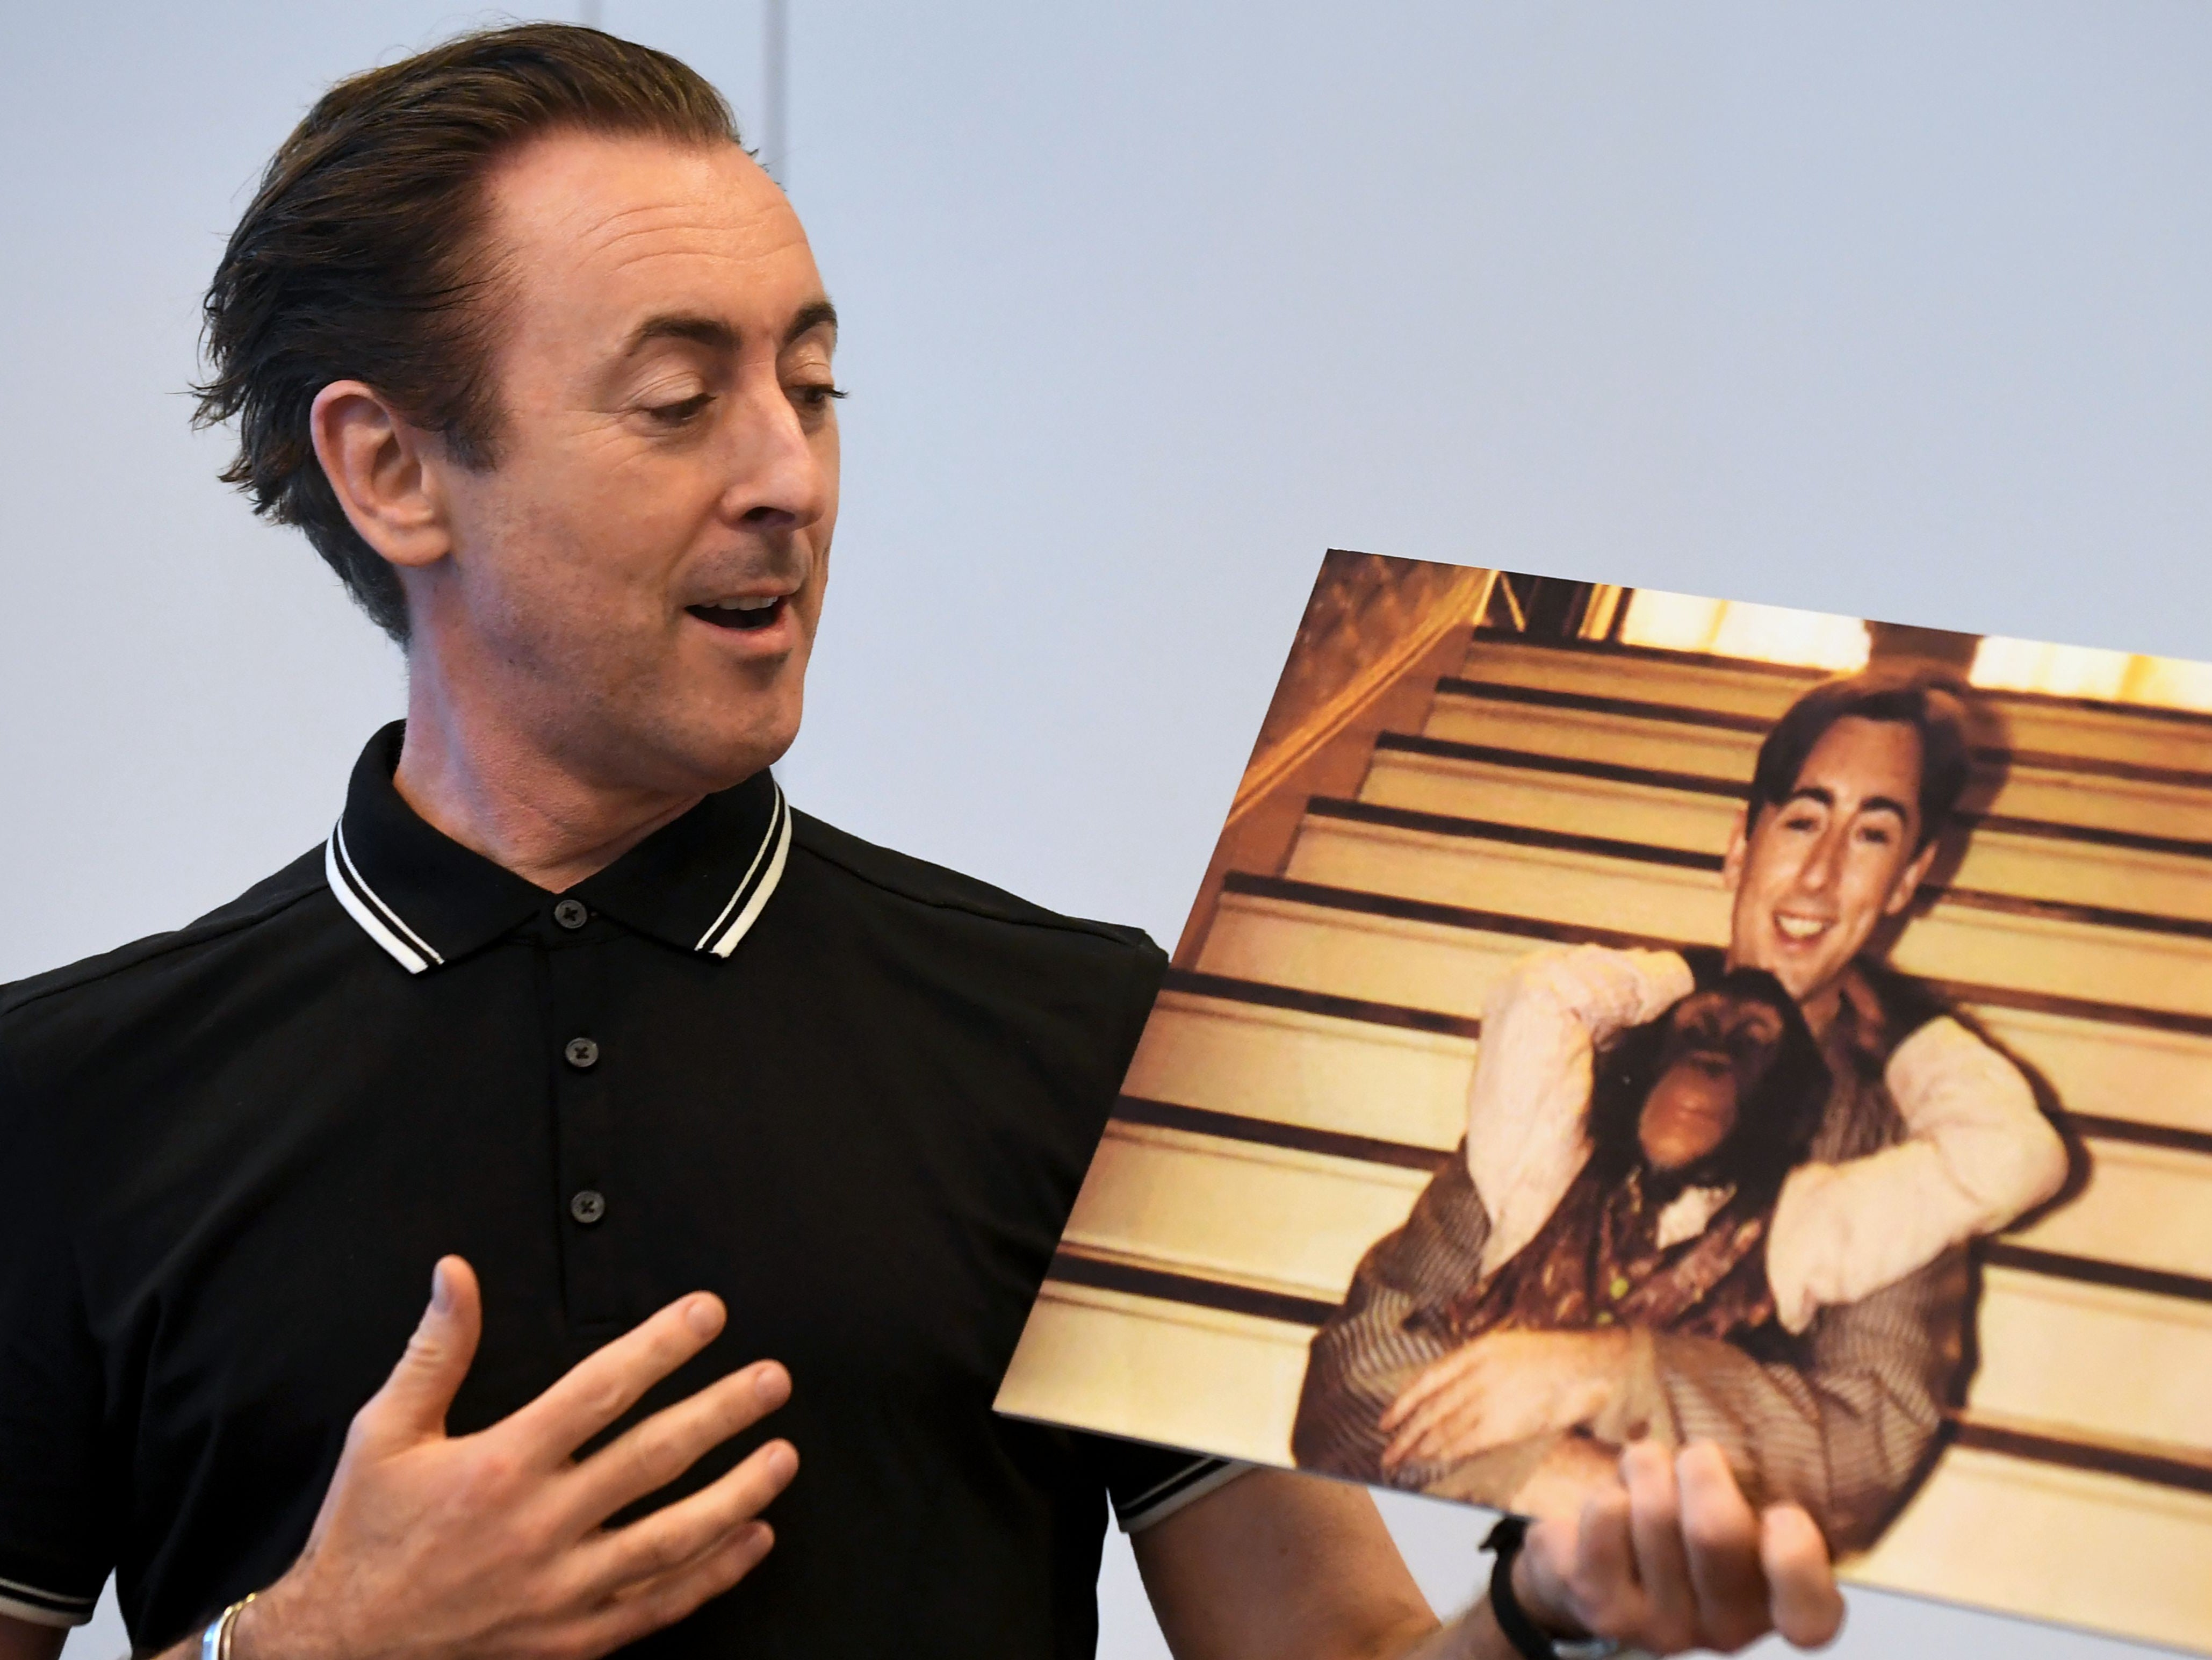 Actor Alan Cumming speaks while holding a photograph of himself with Tonka, his chimpanzee co-star from the 1997 film ‘Buddy’ during an announcement on June 23, 2017